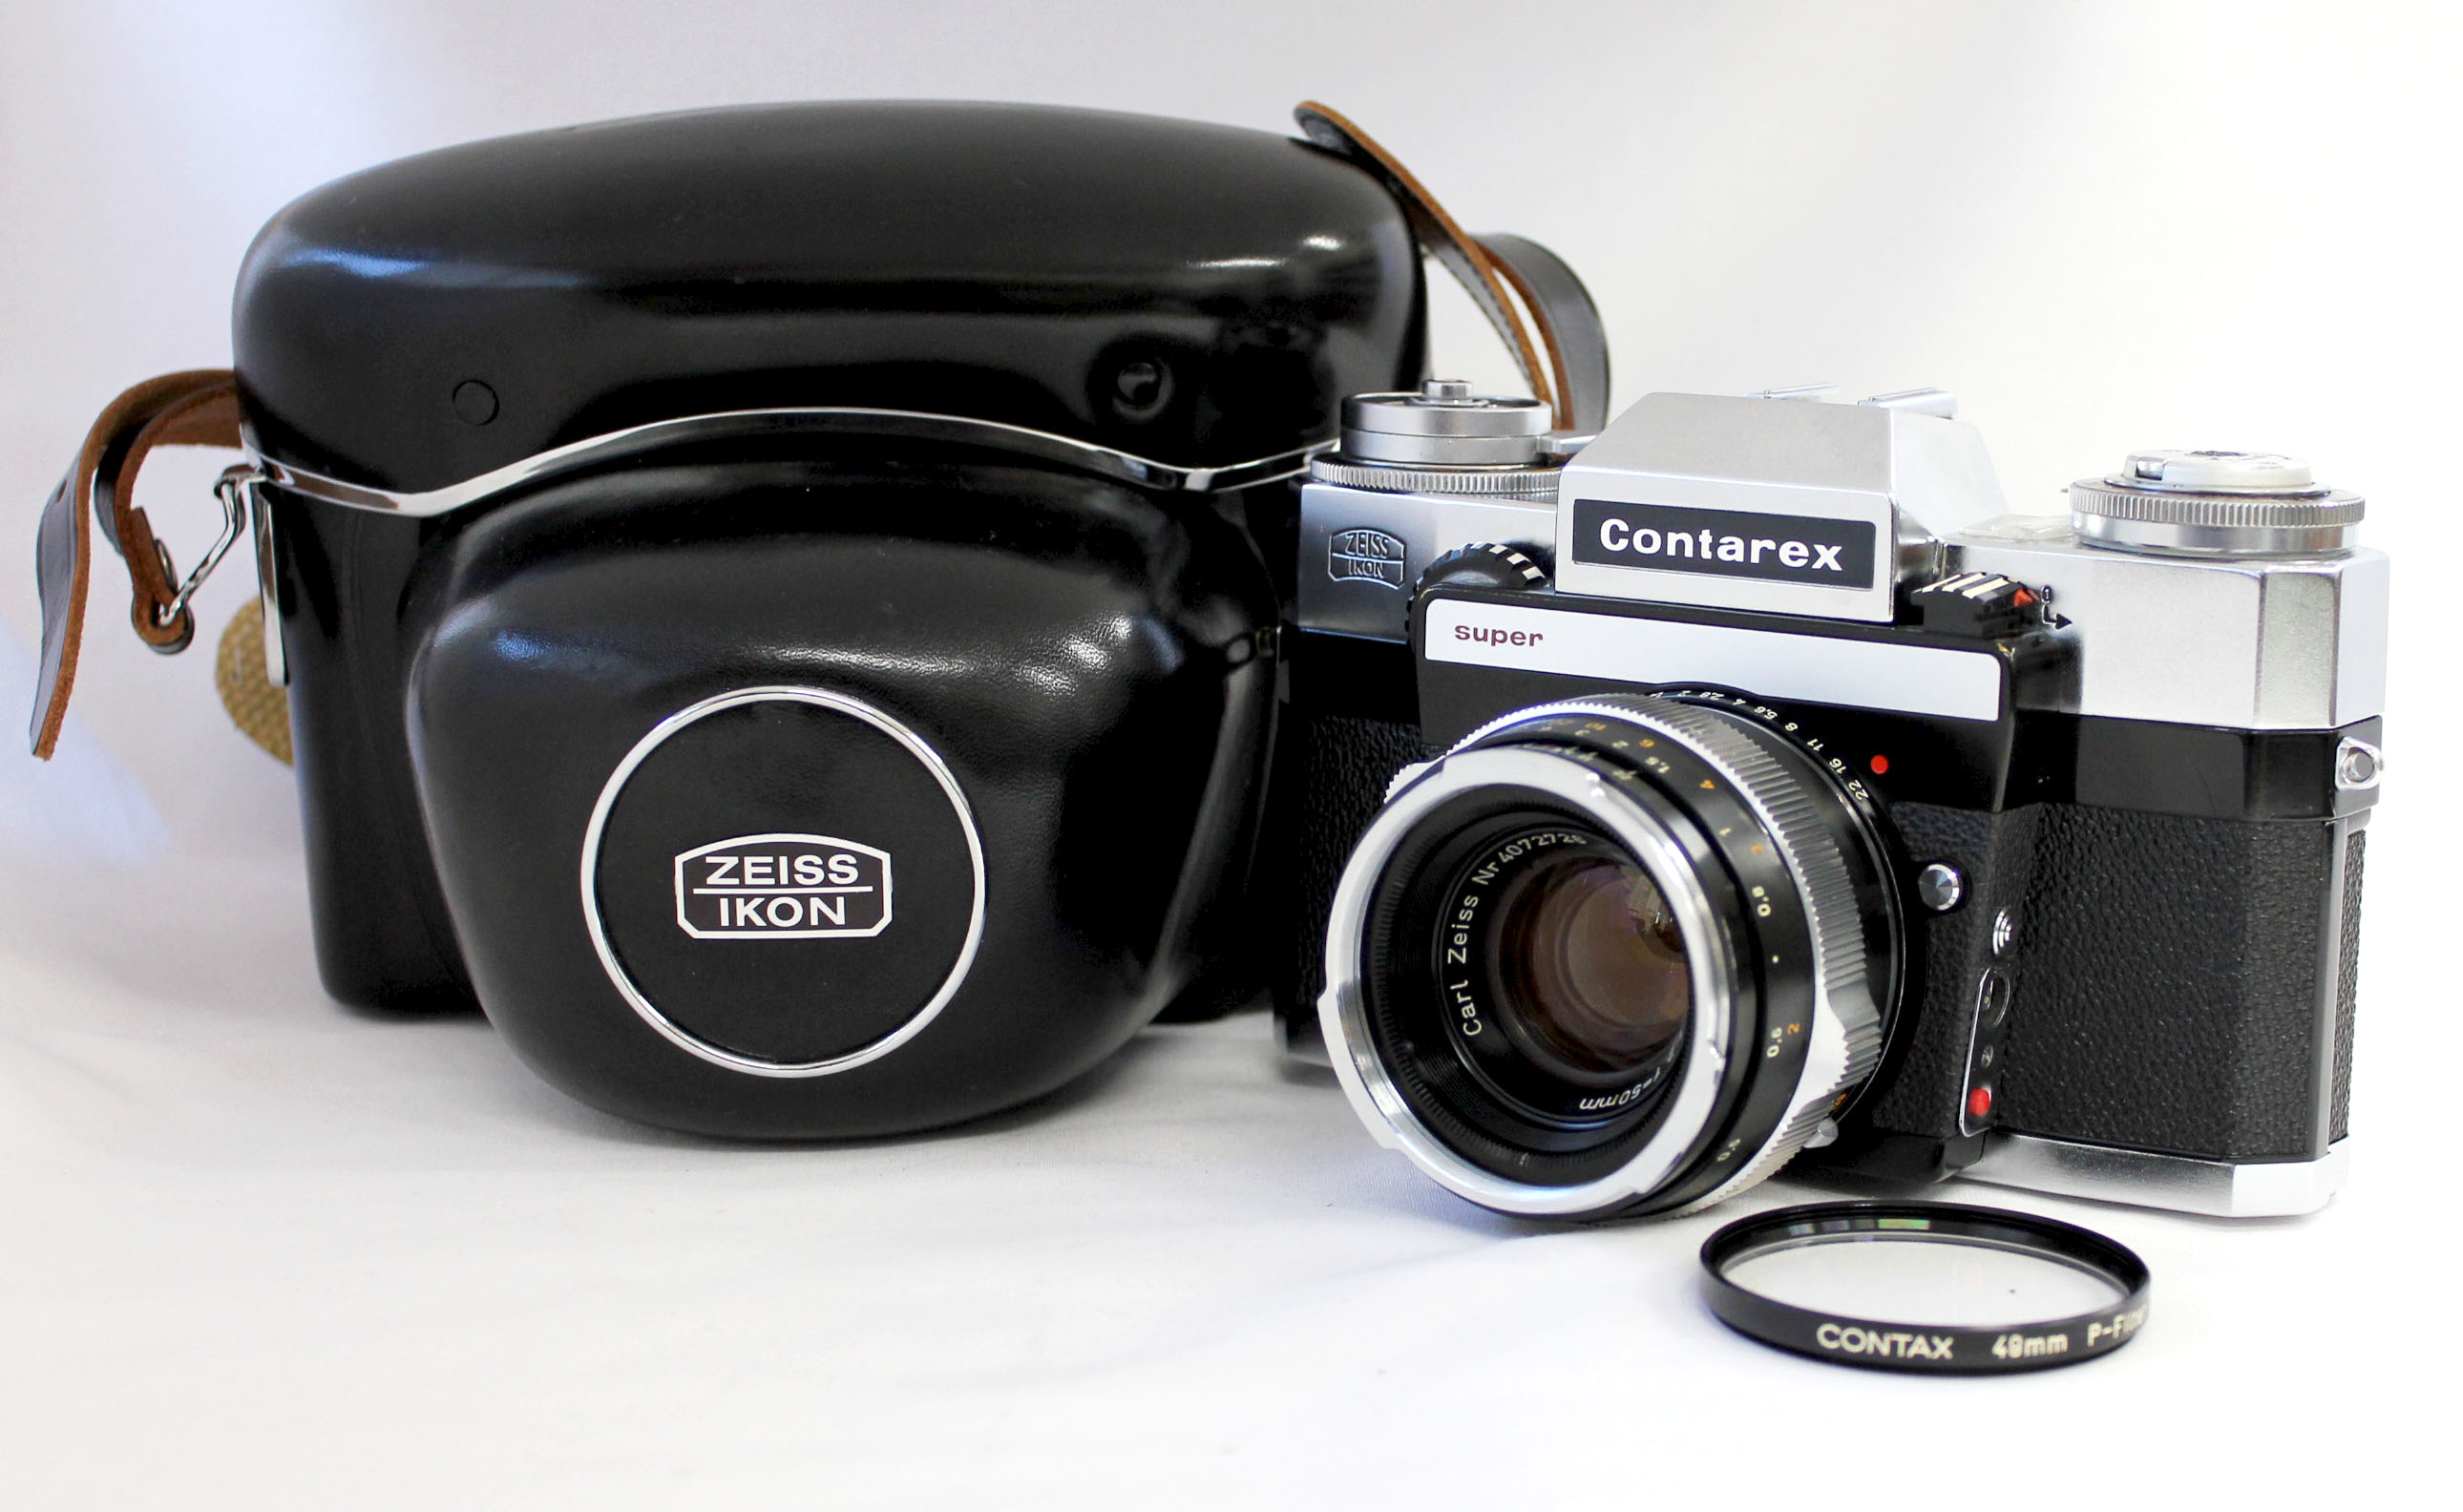 Japan Used Camera Shop | [Near Mint] Zeiss Ikon Contarex Super Silver Chrome 35mm SLR Film Camera with Planar 50mm F/2 & Case/Strap from Japan